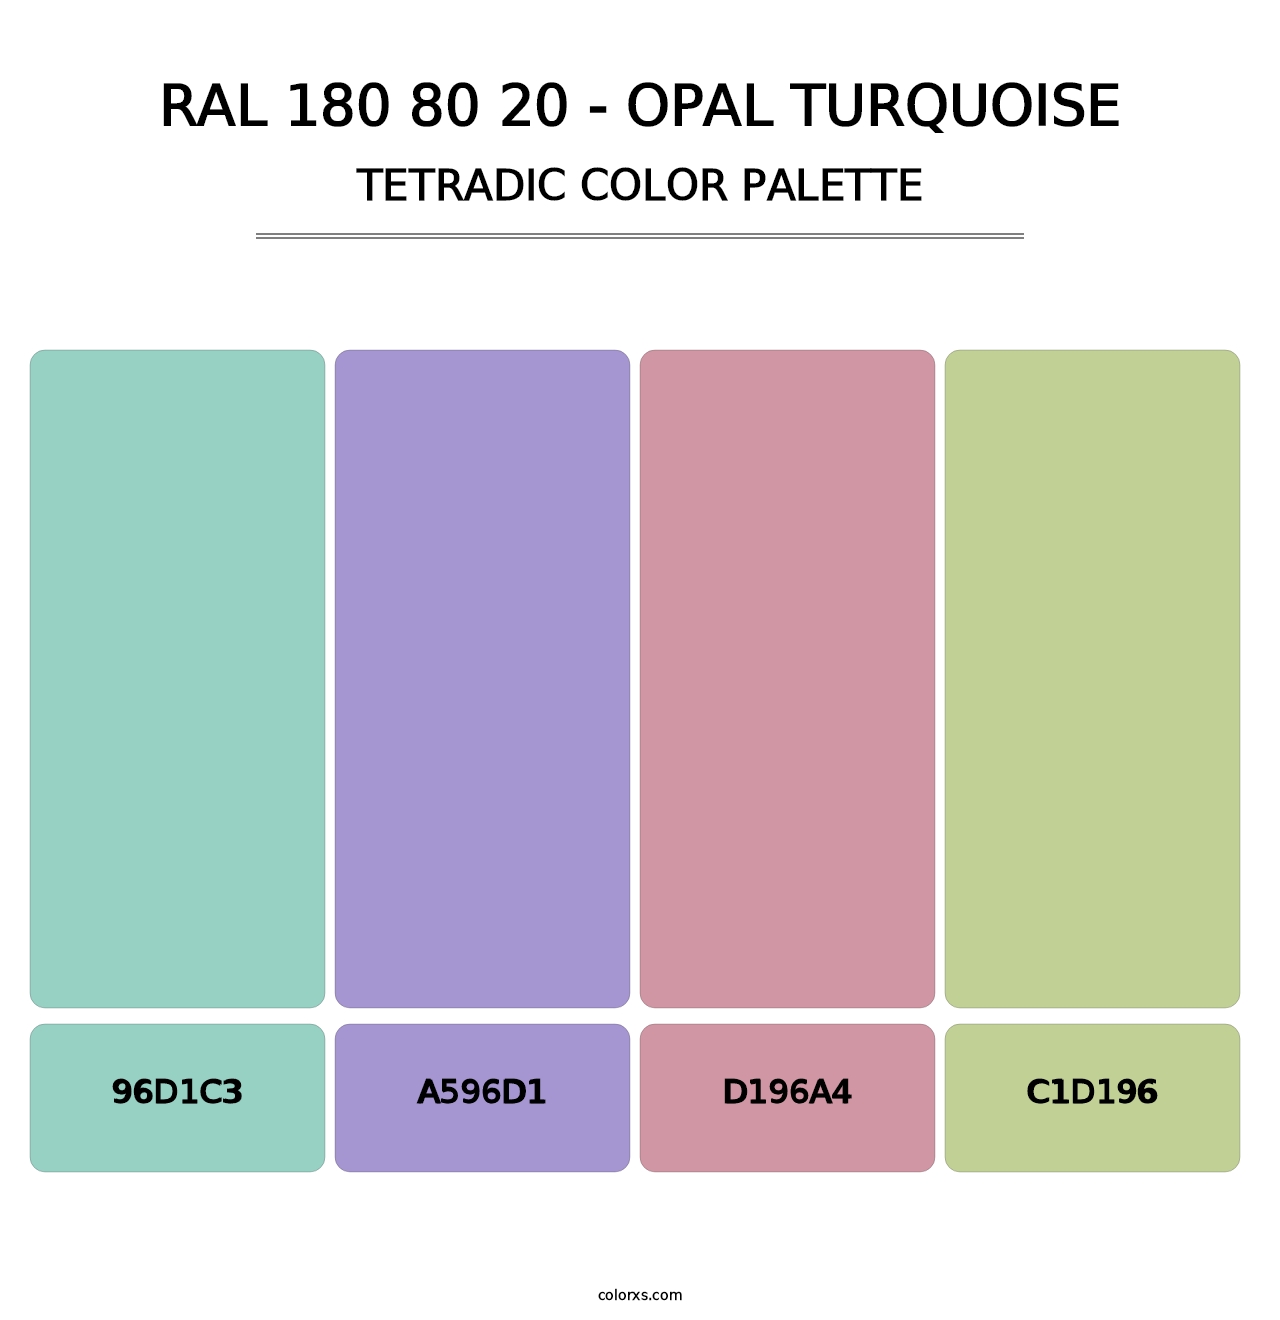 RAL 180 80 20 - Opal Turquoise - Tetradic Color Palette